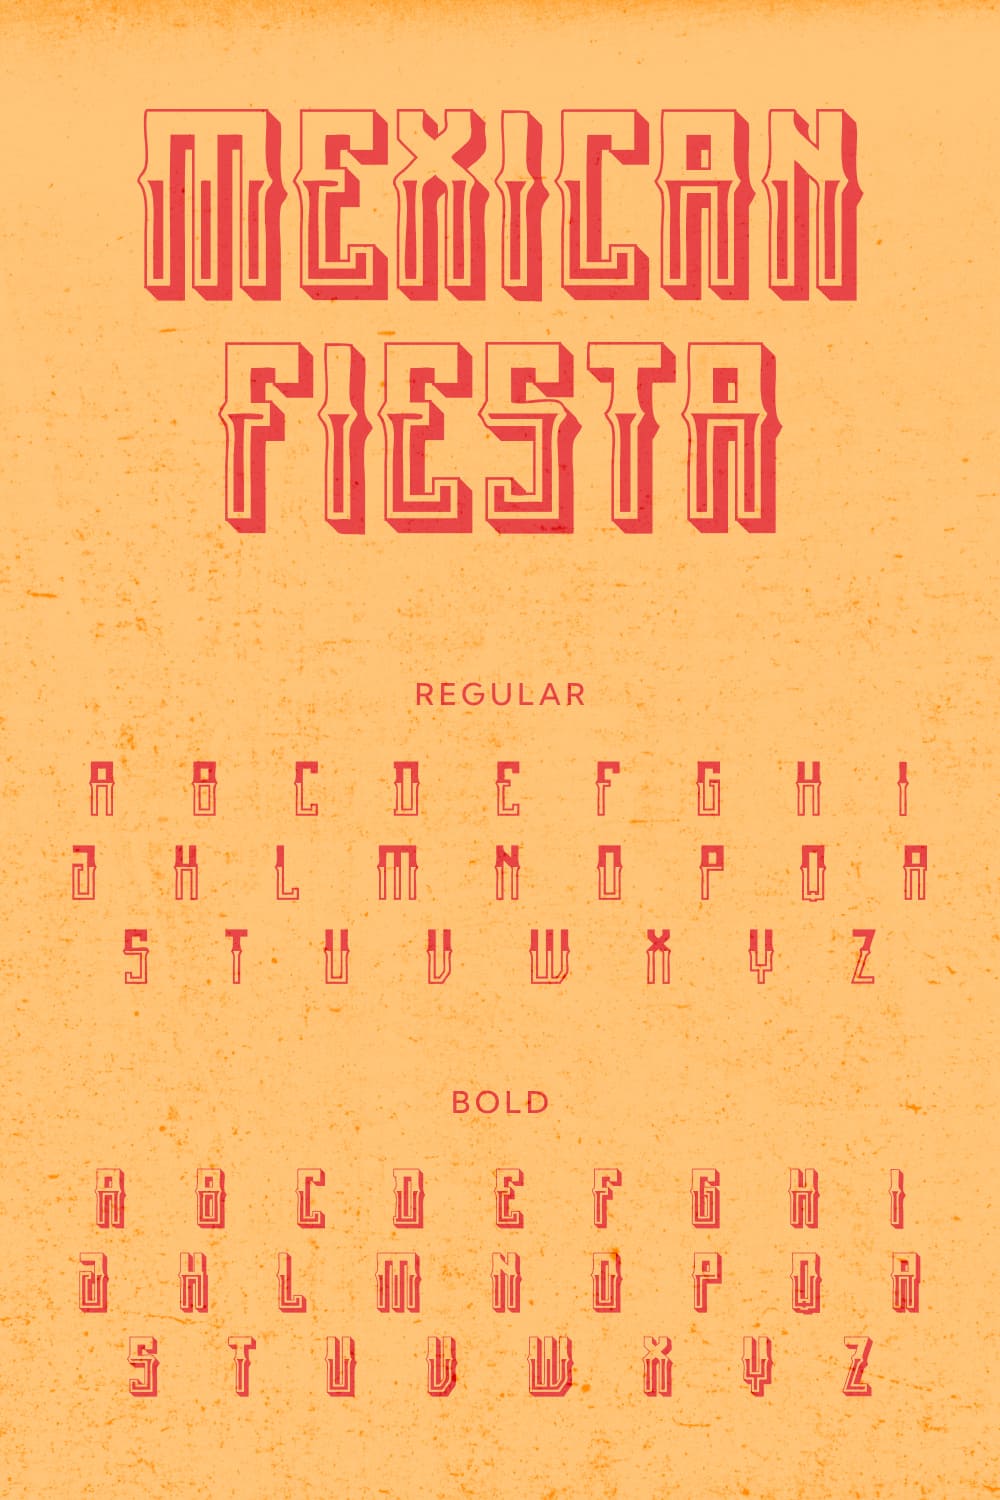 Free Mexican Font: Mexican fiesta Pinterest regular and bold types.